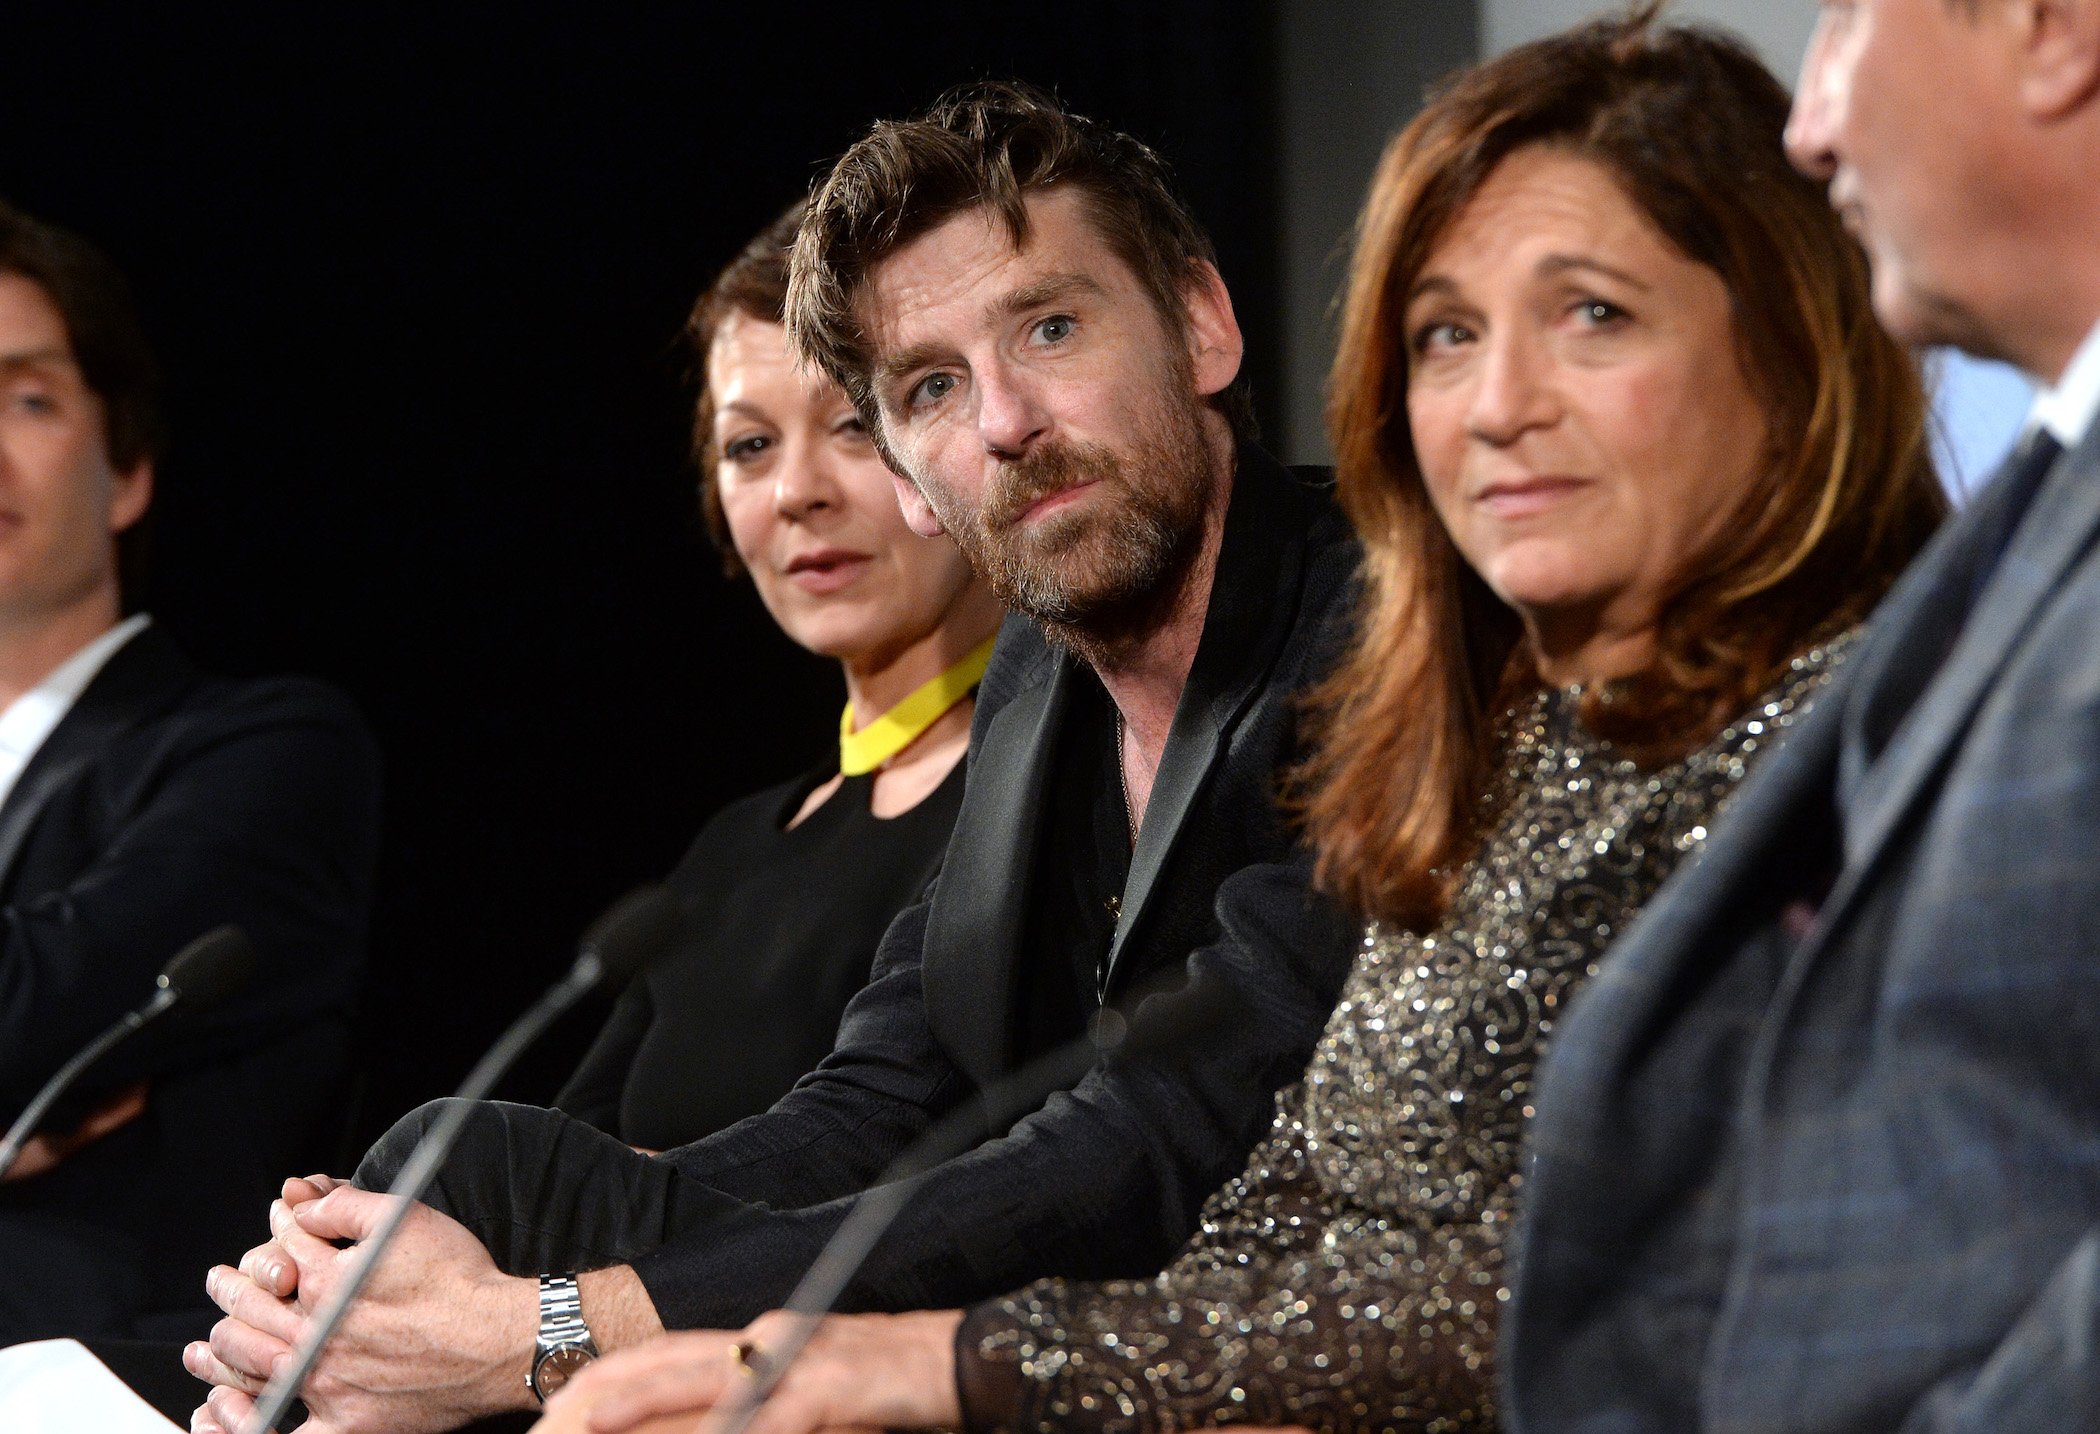 Paul Anderson, Arthur Shelby in 'Peaky Blinders' Season 6, at a Q&A with others from the series beside him